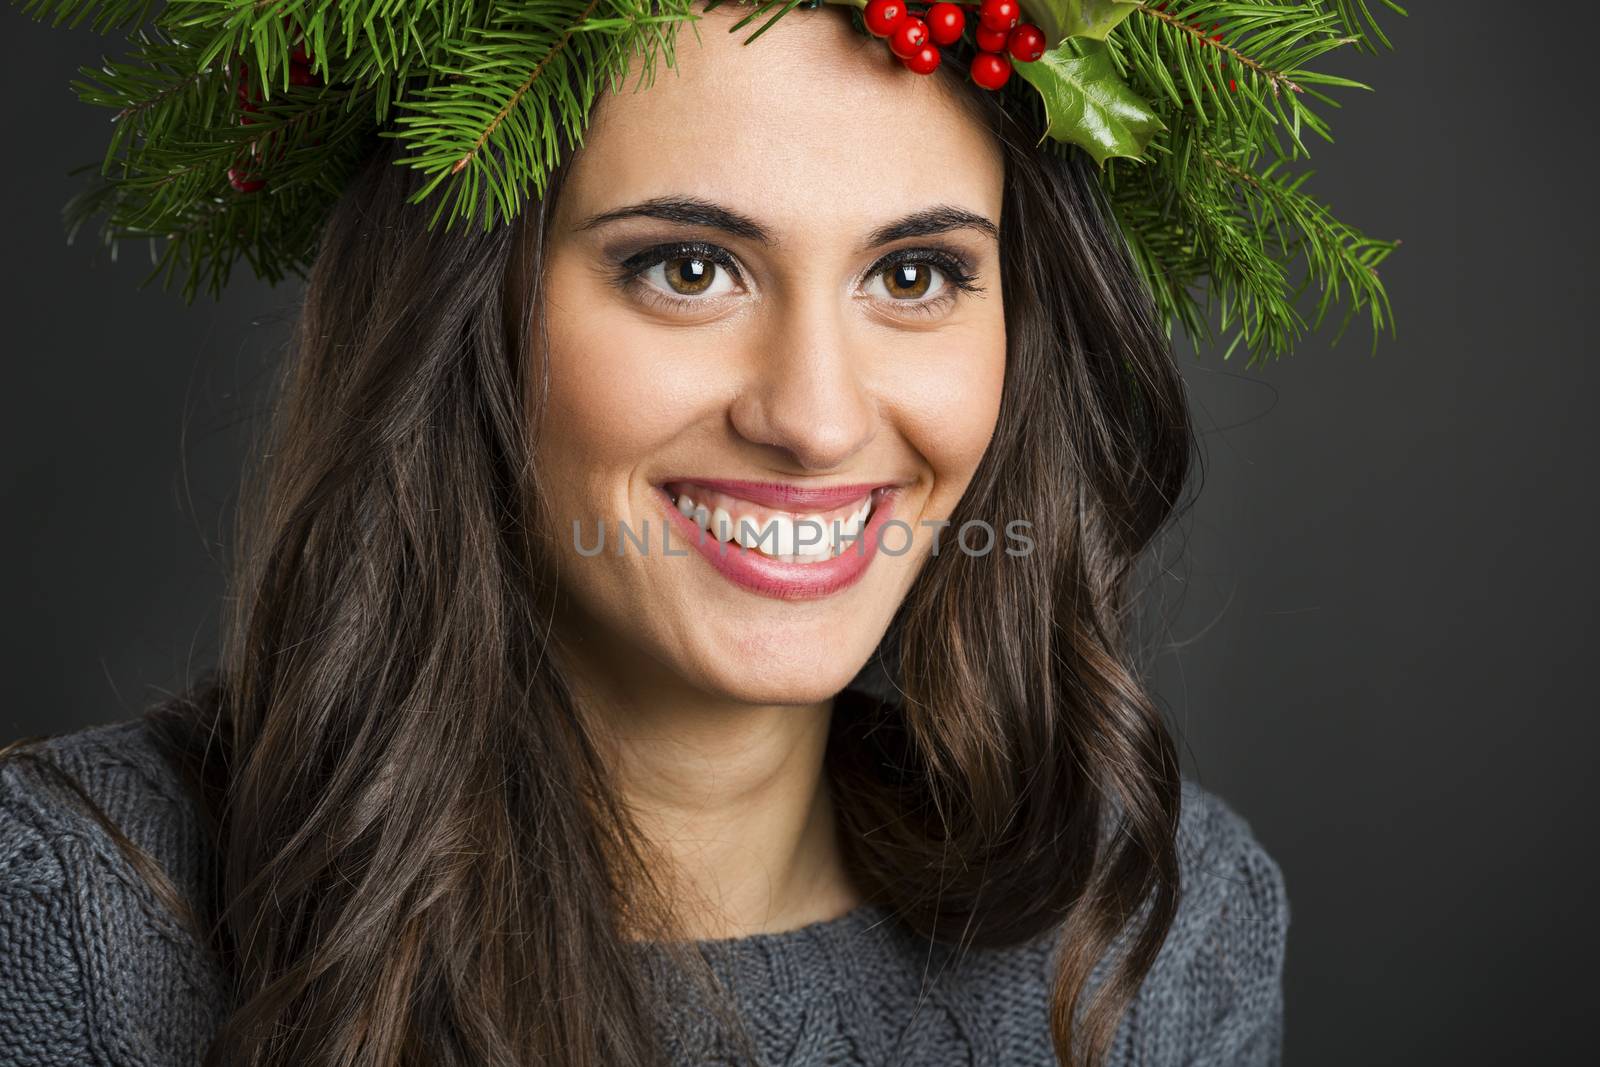 Portrait of a beautiful woman with Cristmas decorations on the head